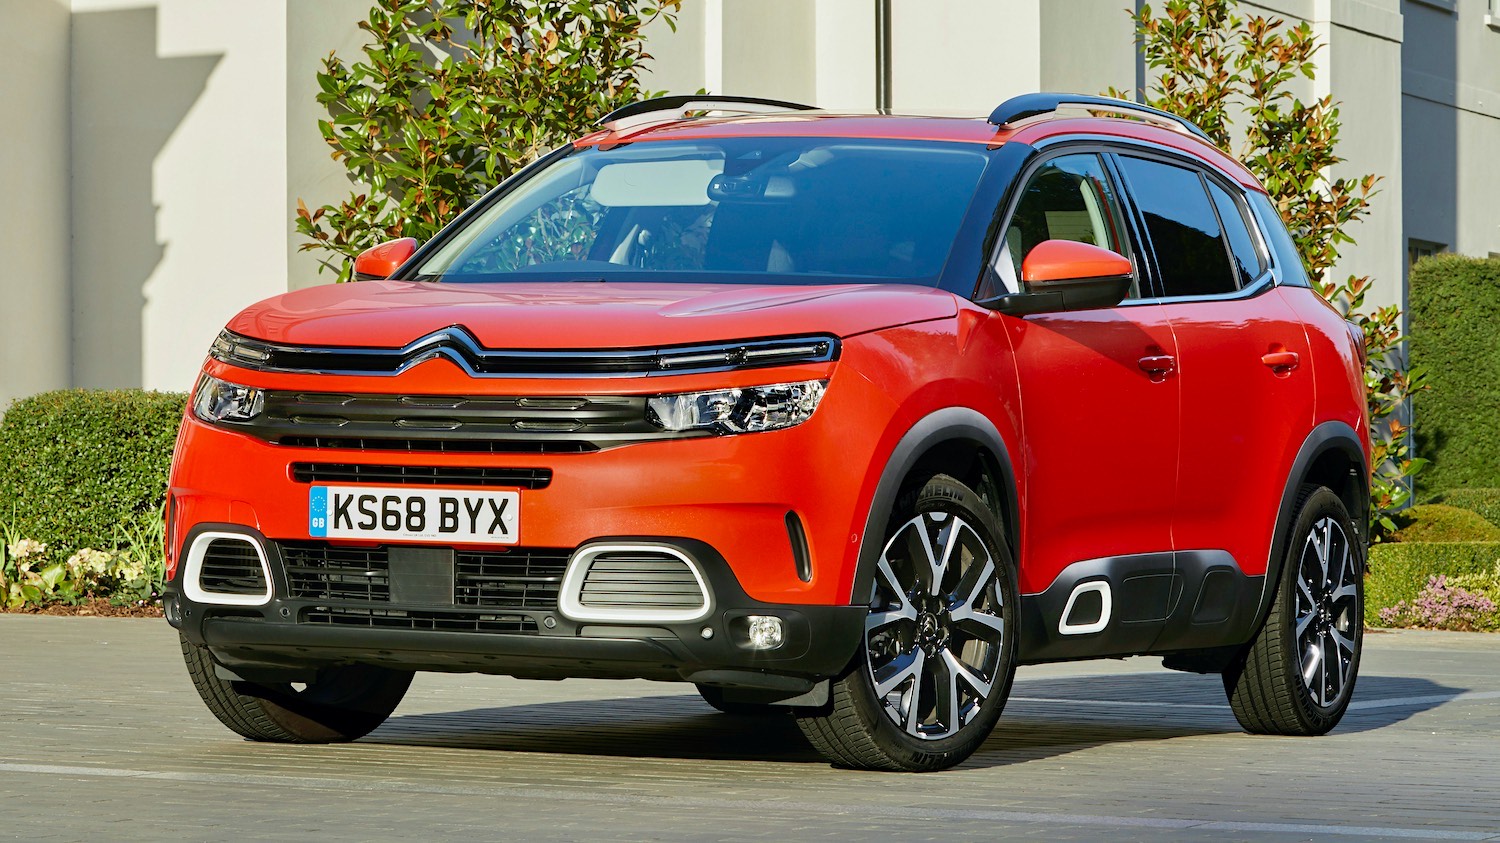 https://www.drive.co.uk/wp-content/uploads/2021/05/Kieran-Bicknell-reviews-the-Citroen-C5-Aircross-SUV-for-Drive-14.jpeg